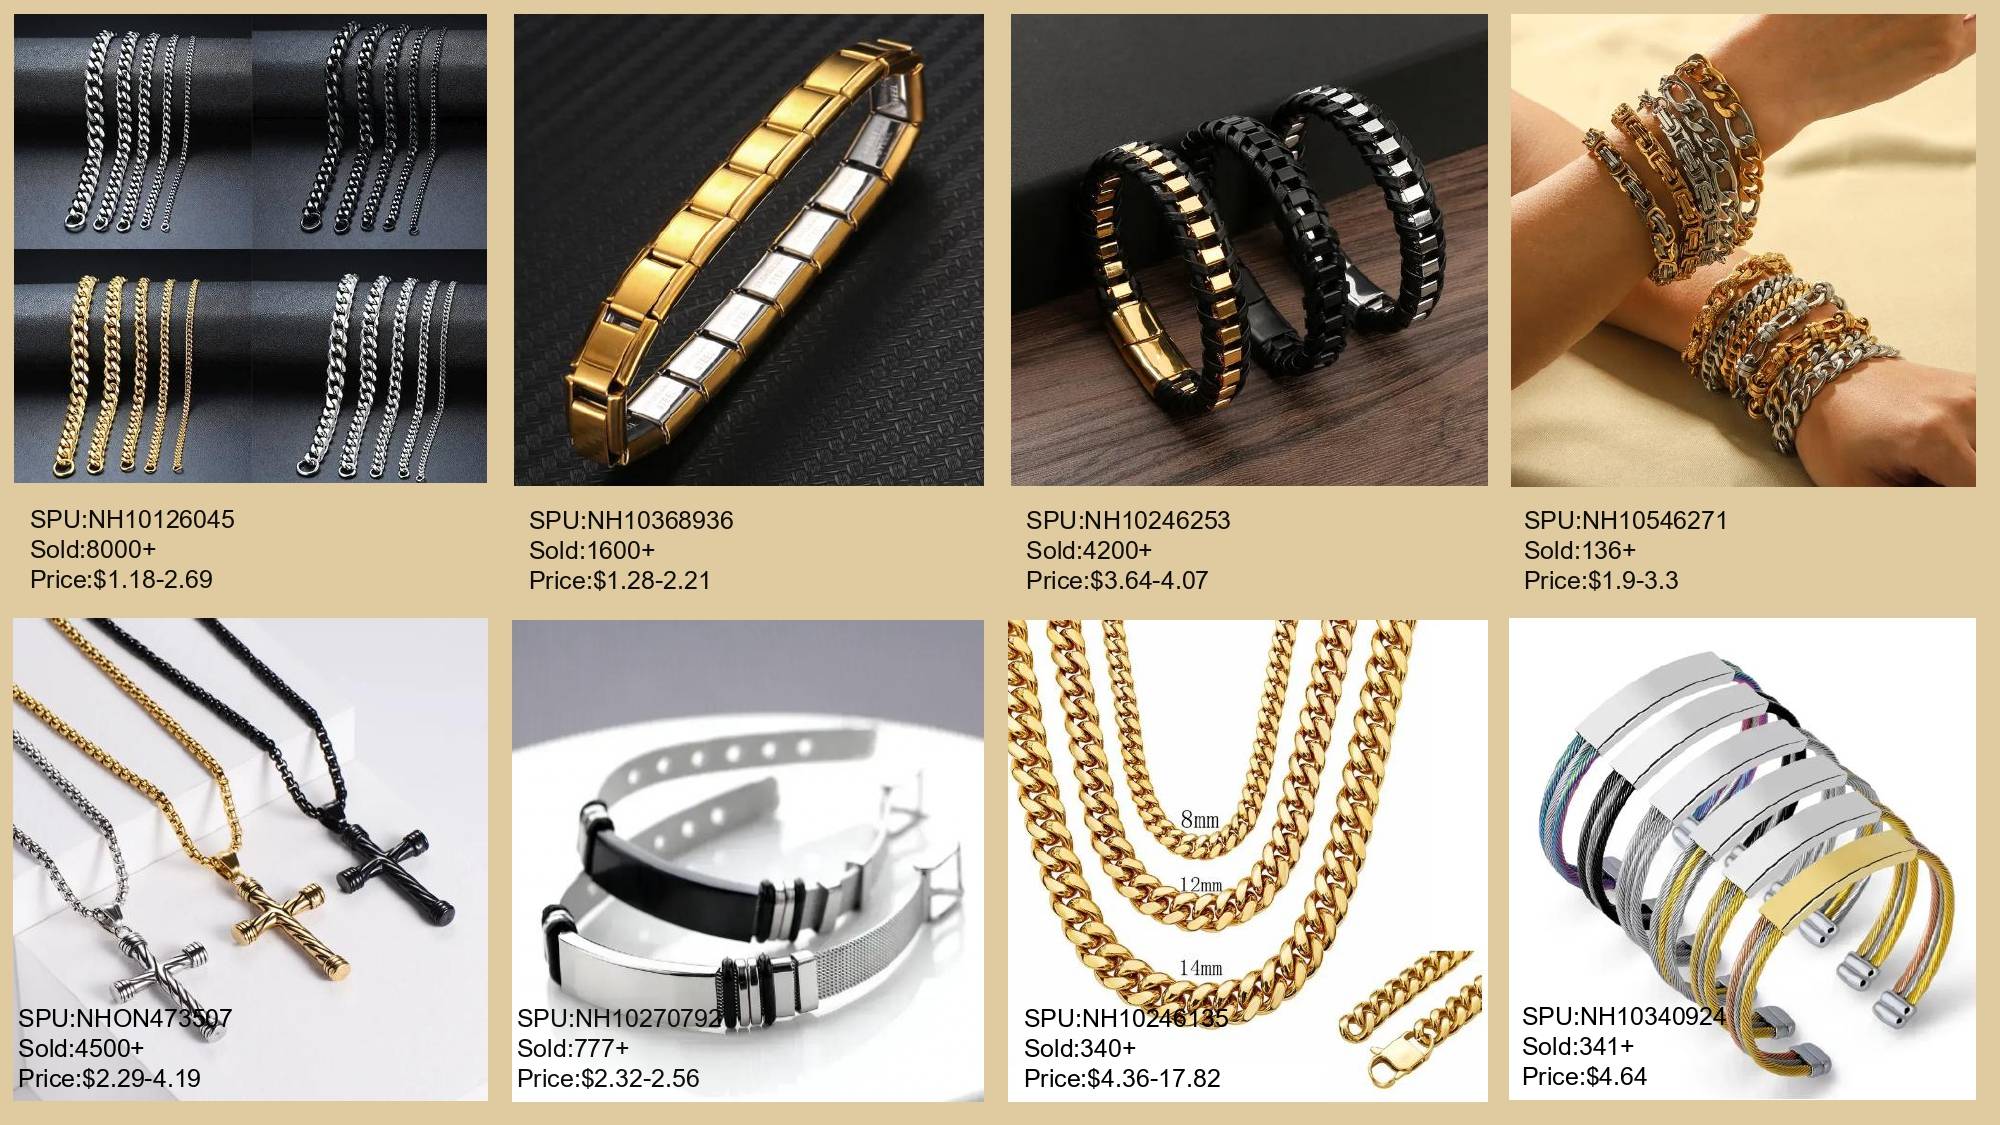 Browse Nihaojewelry to discover more quality men's jewelry wholesale products at incredible prices.